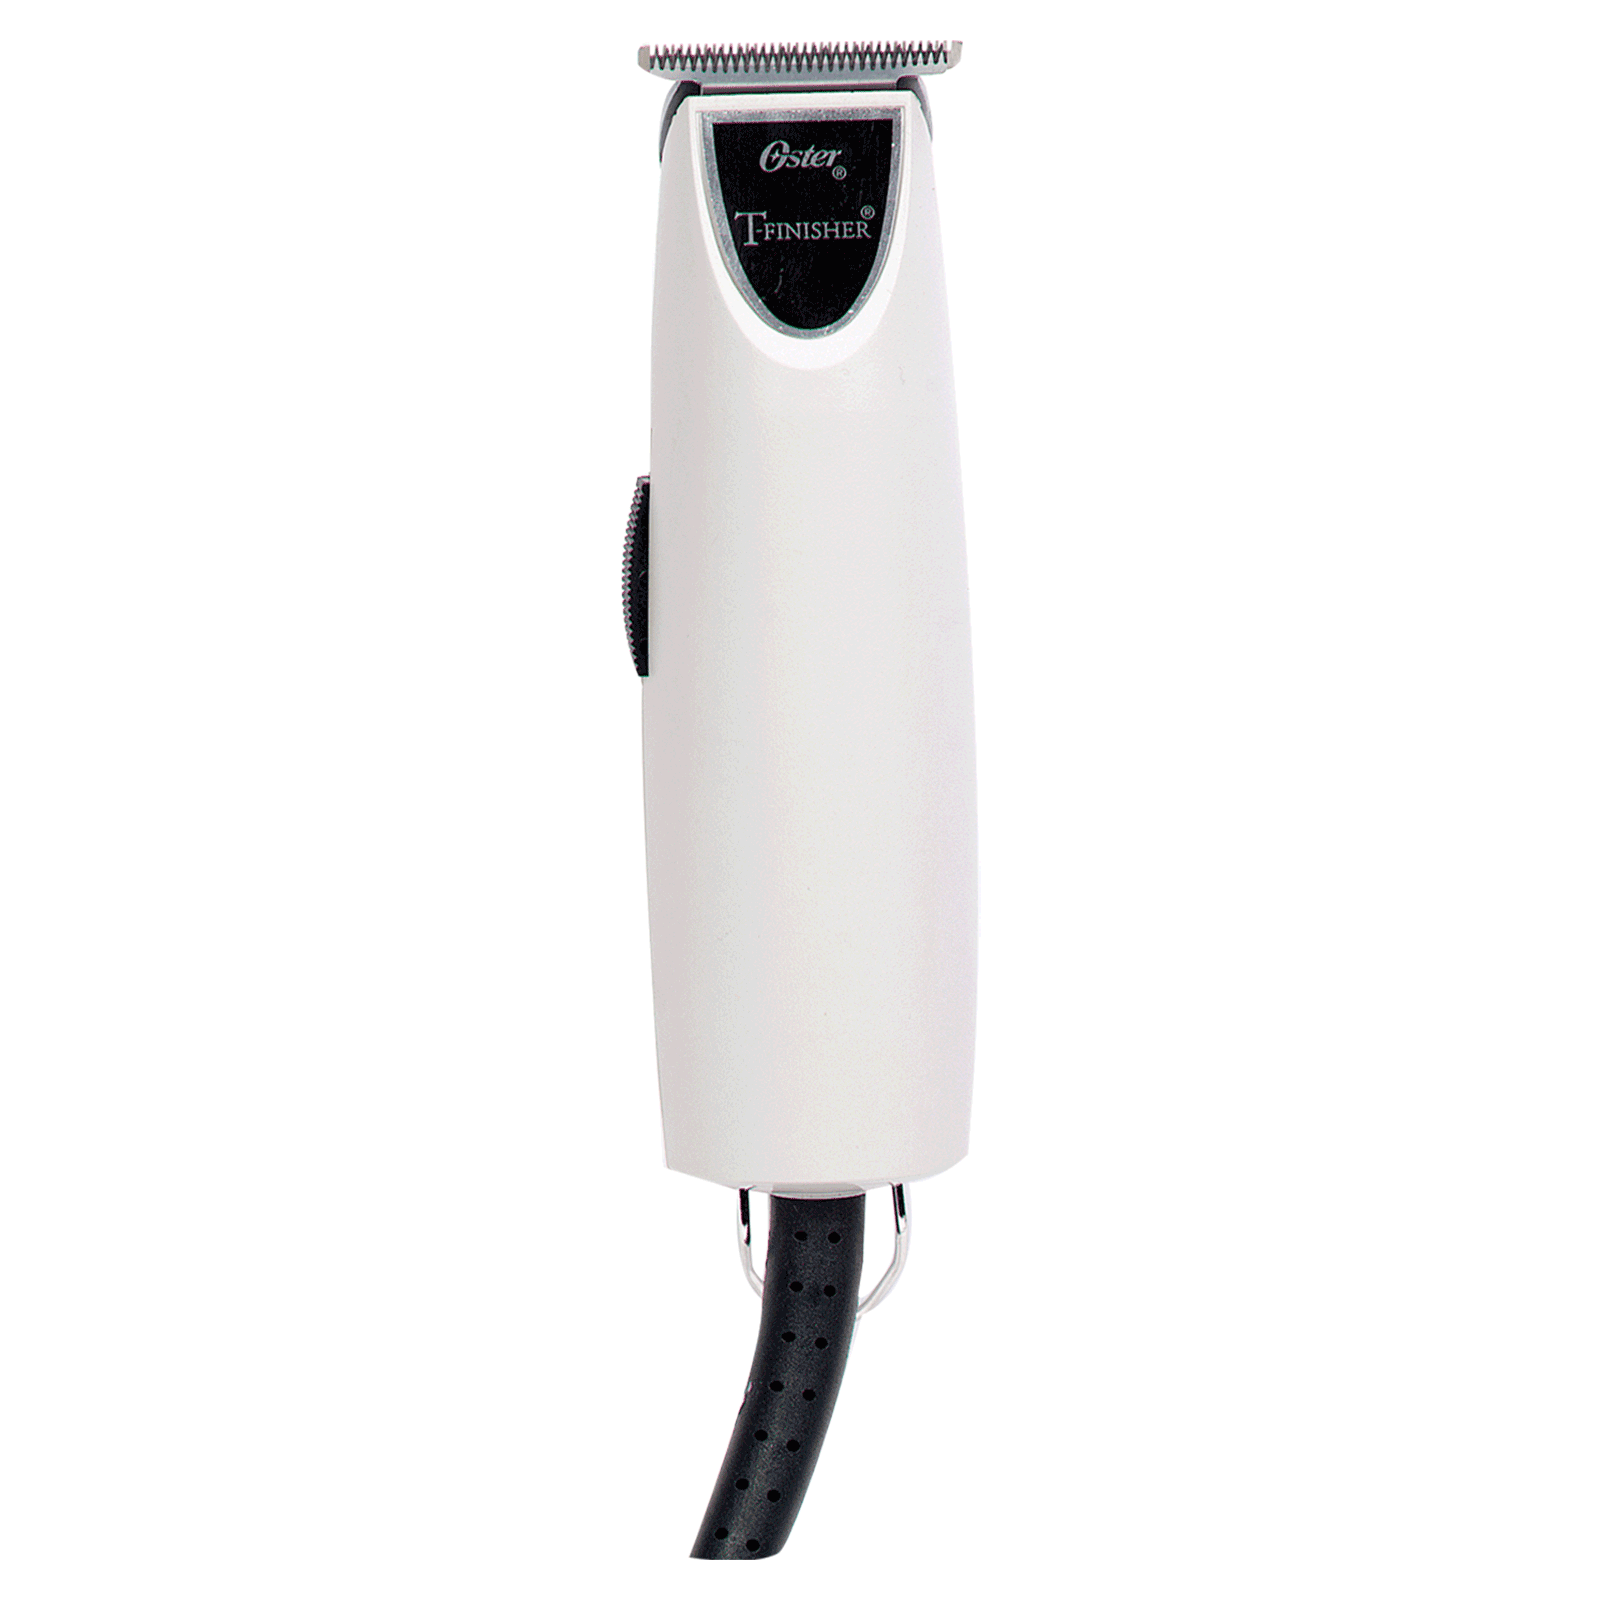 T-Finisher Trimmer - Oster | CosmoProf